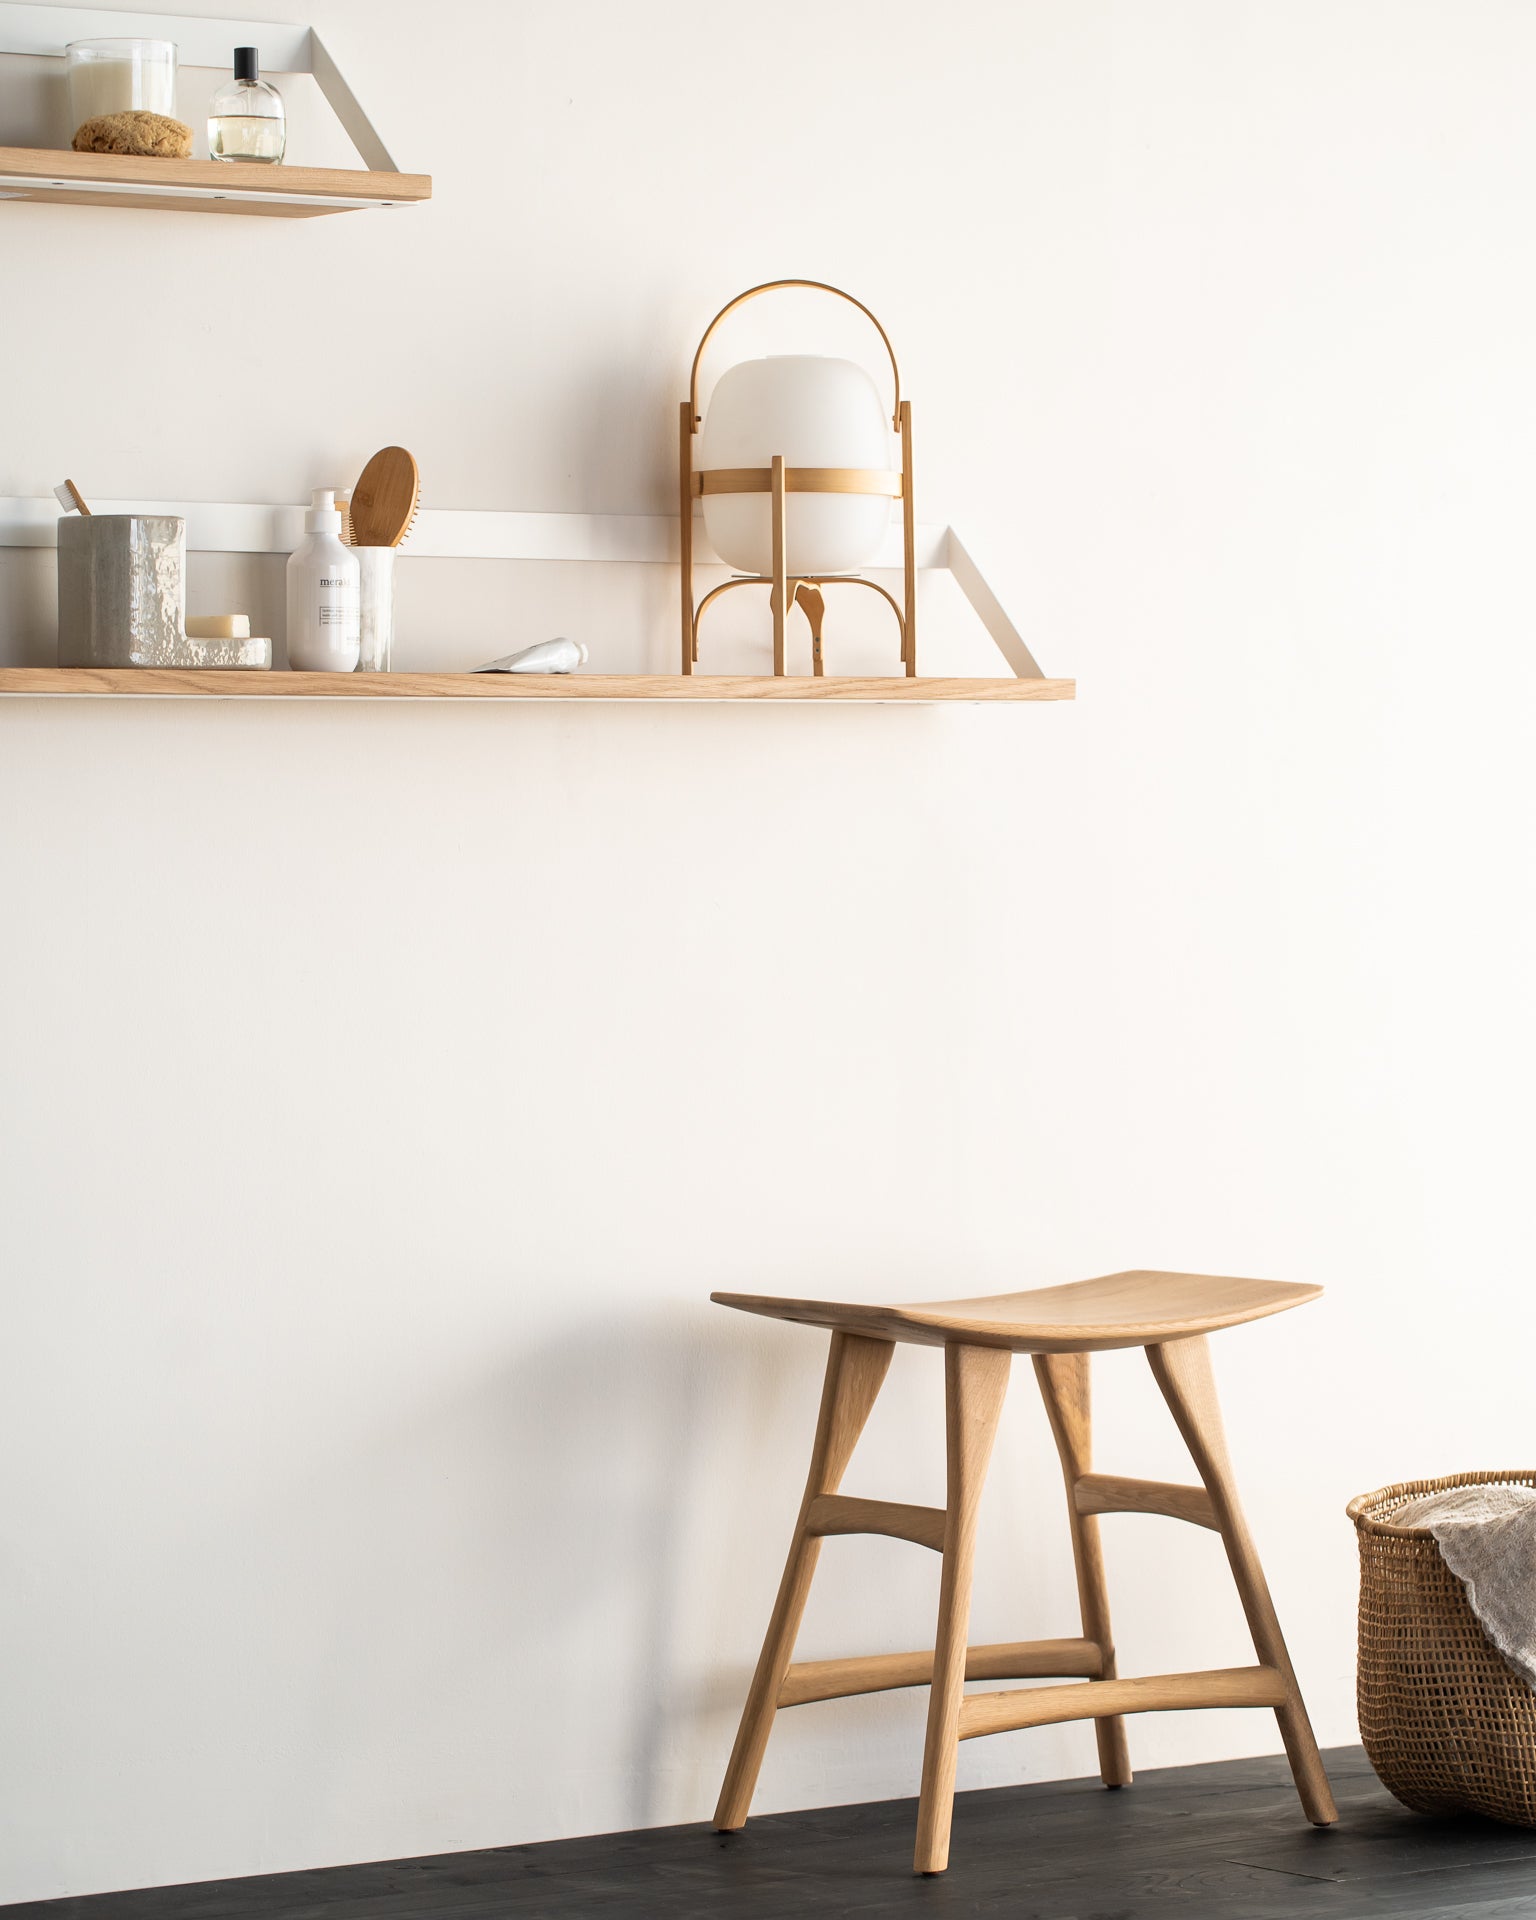 Ethnicraft Oak Osso Low Stool available from Make Your House A Home, Bendigo, Victoria, Australia